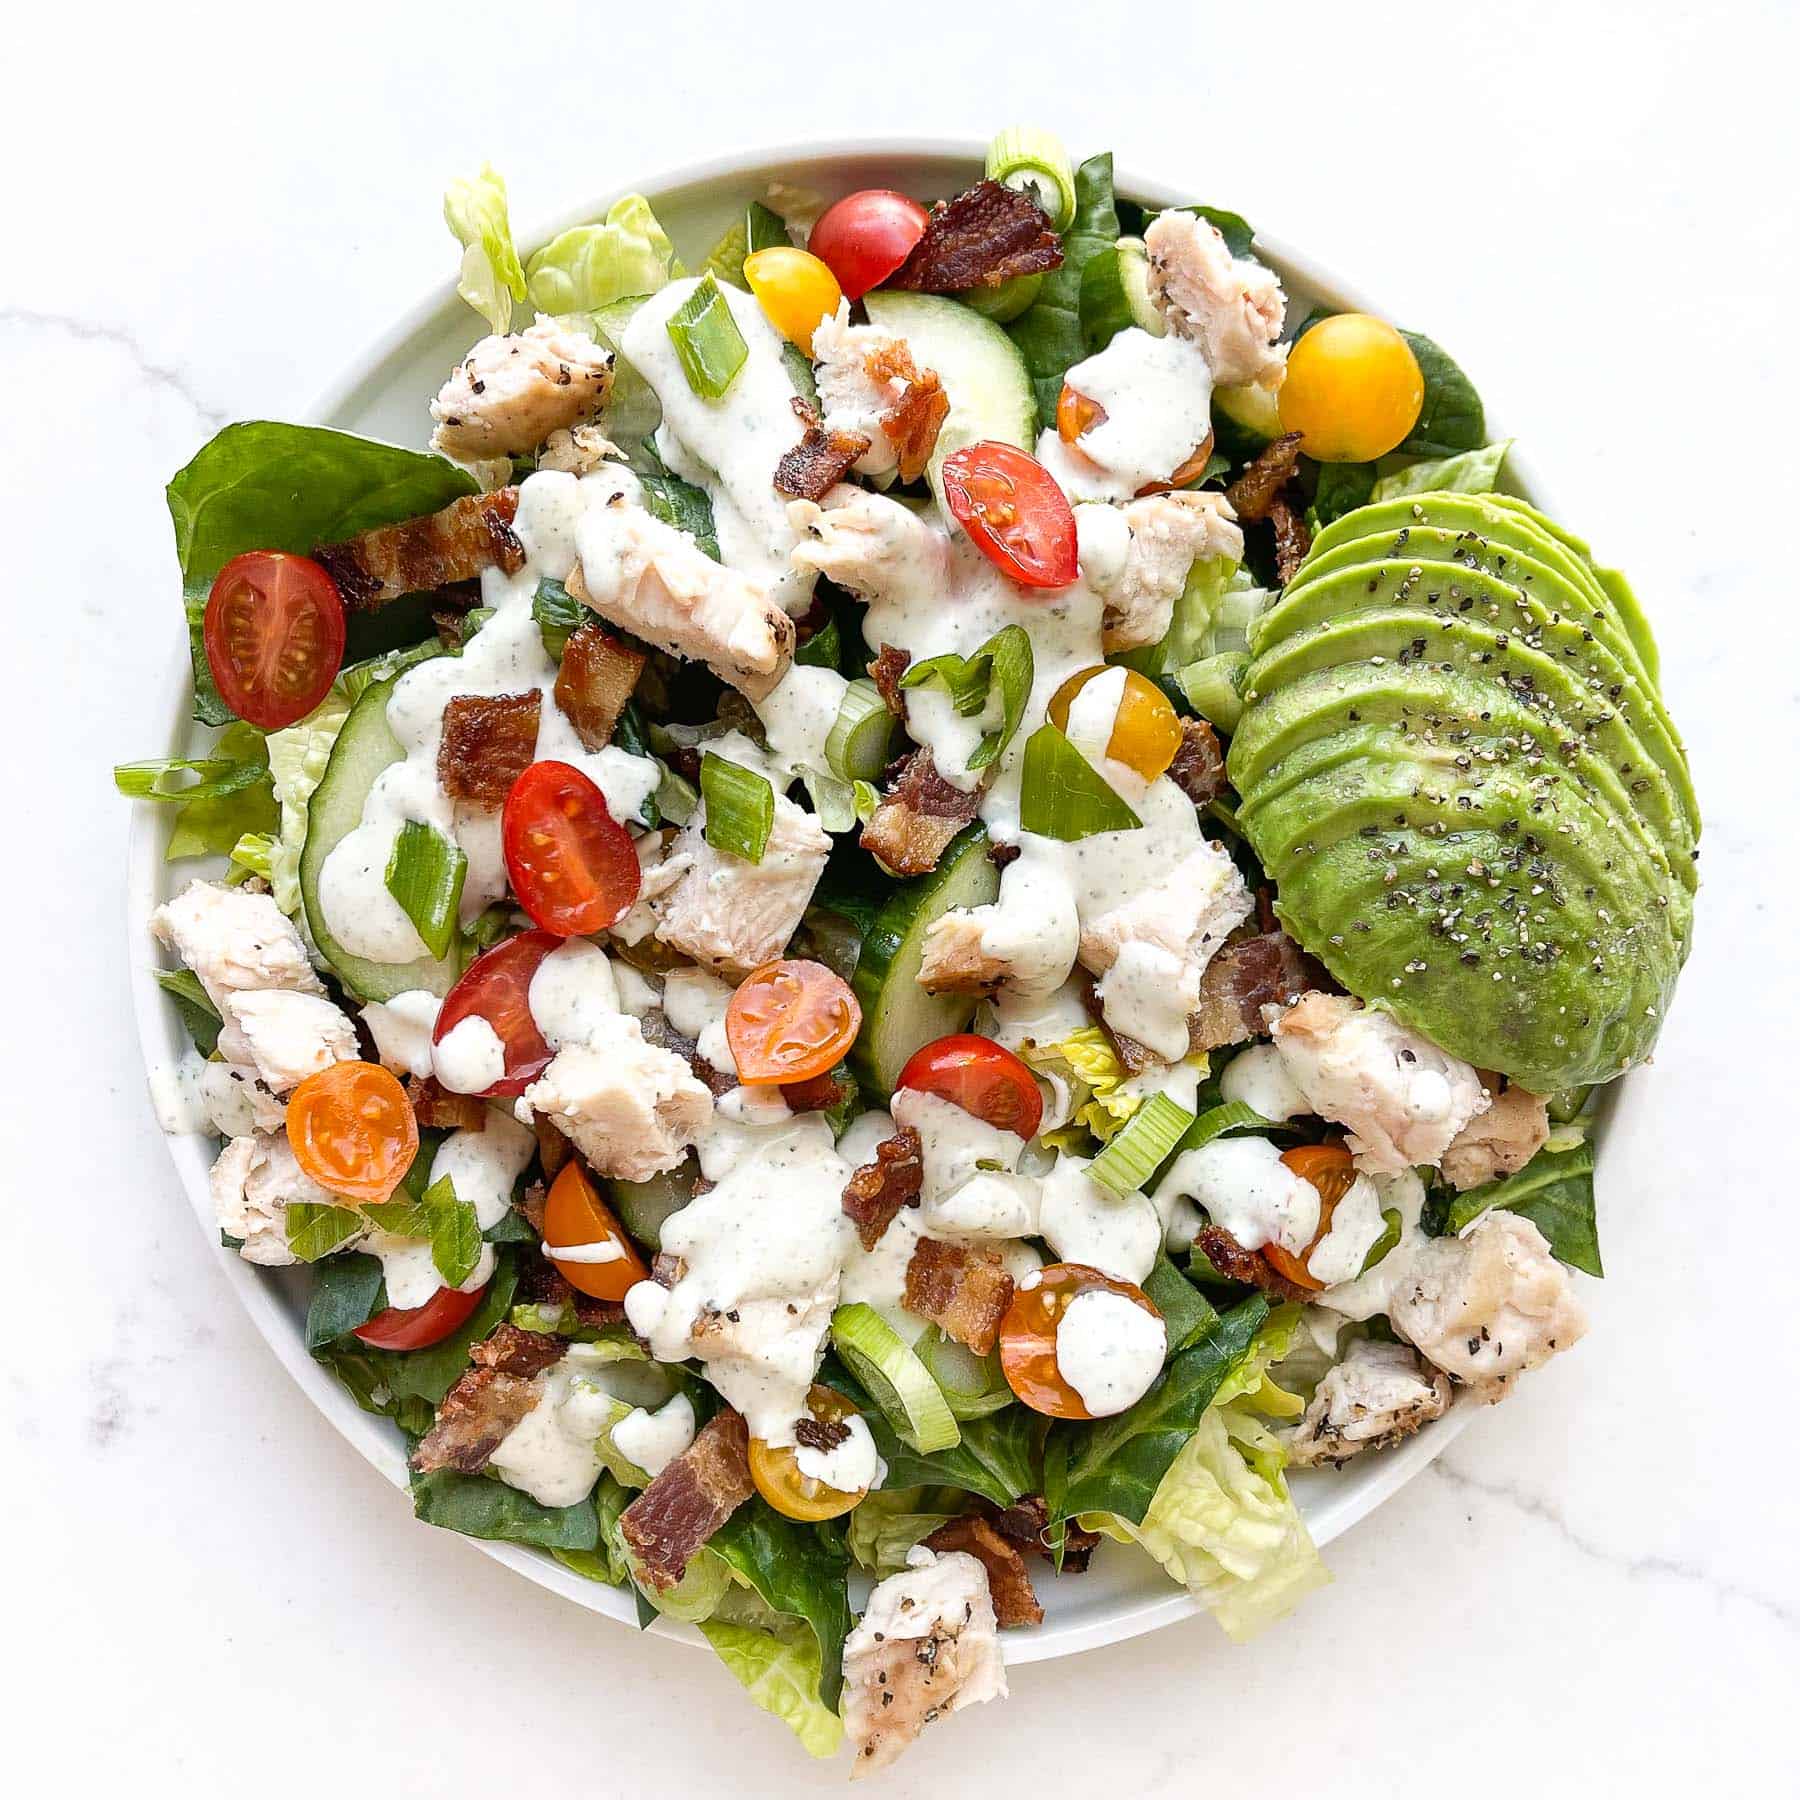 Salad topped with ranch dressing, chicken, avocado, tomatoes, bacon.